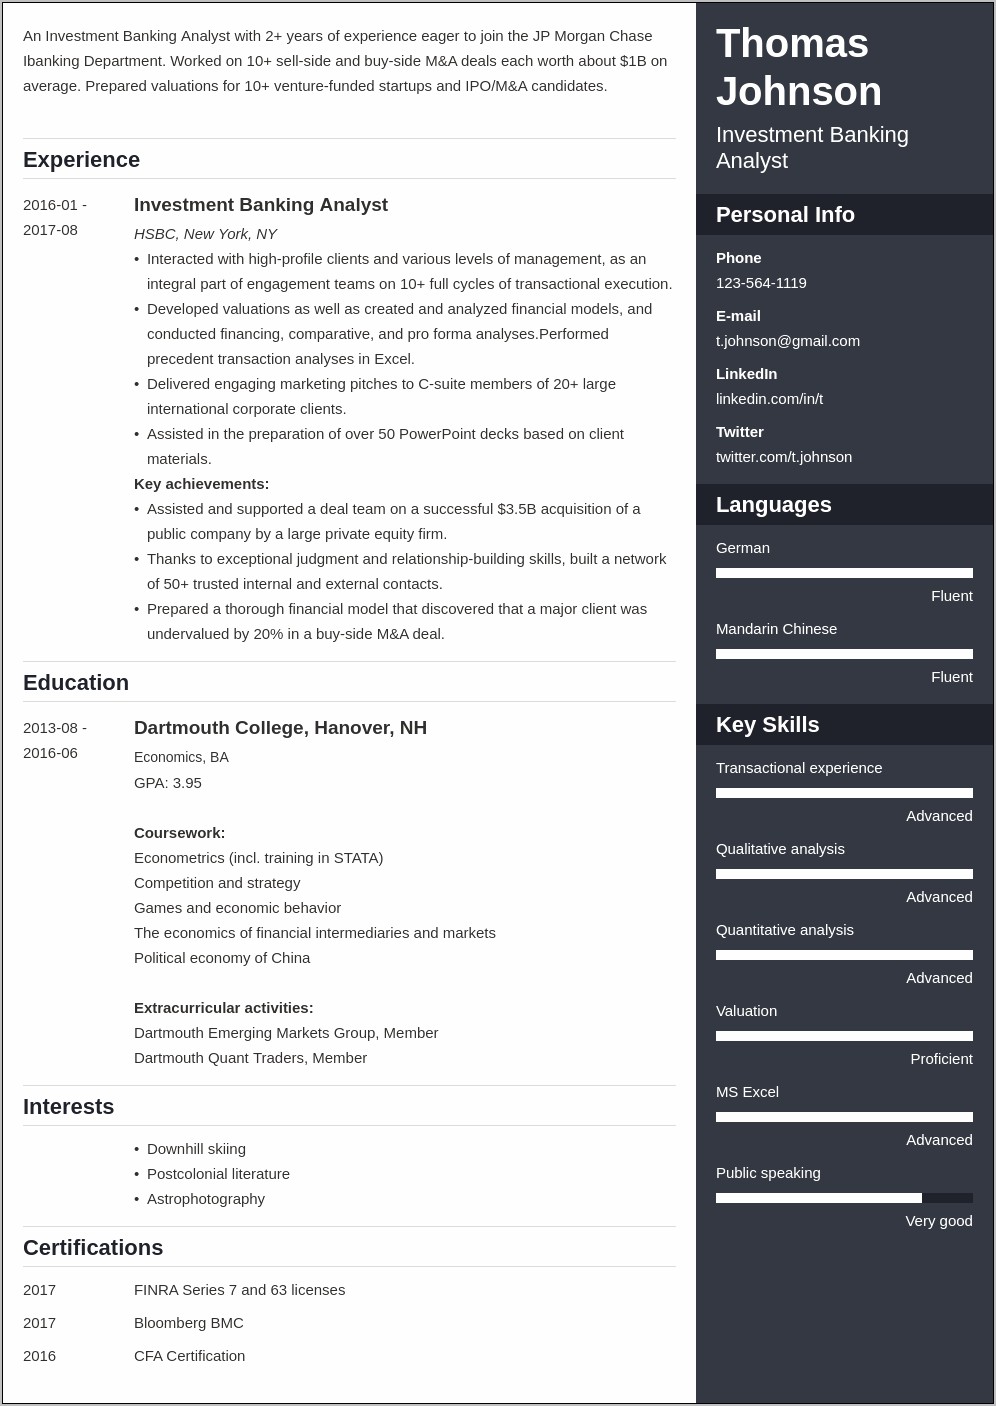 Sample Resume Of An Investment Banker